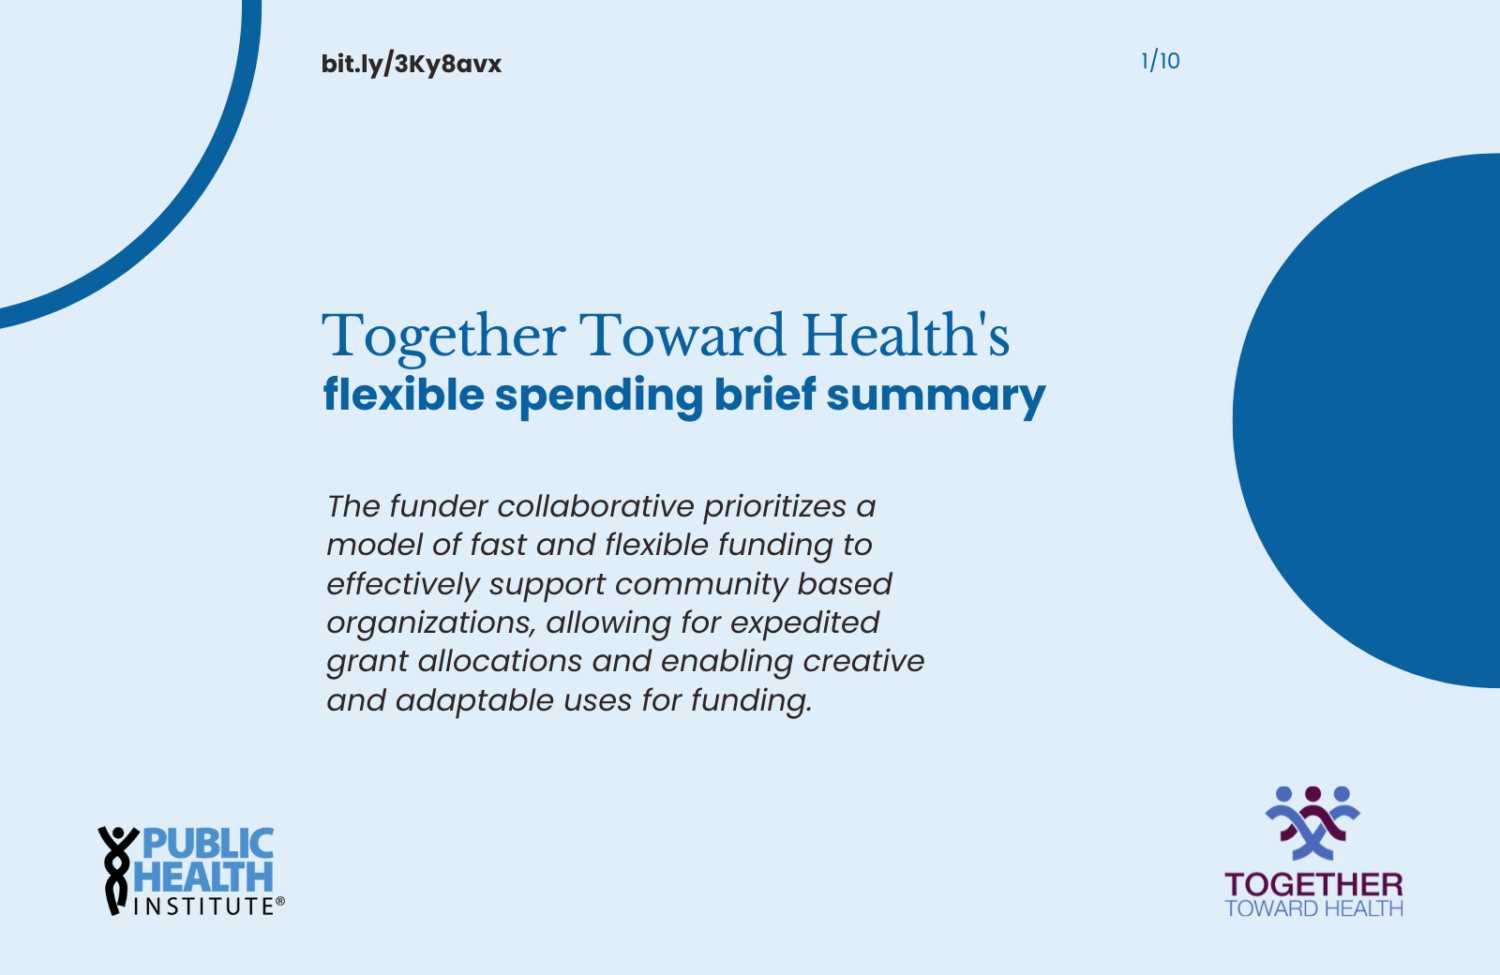 The funder collaborative prioritizes a model of fast and flexible funding to effectively support community based organizations, allowing for expedited grant allocations and enabling creative and adaptable uses for funding.